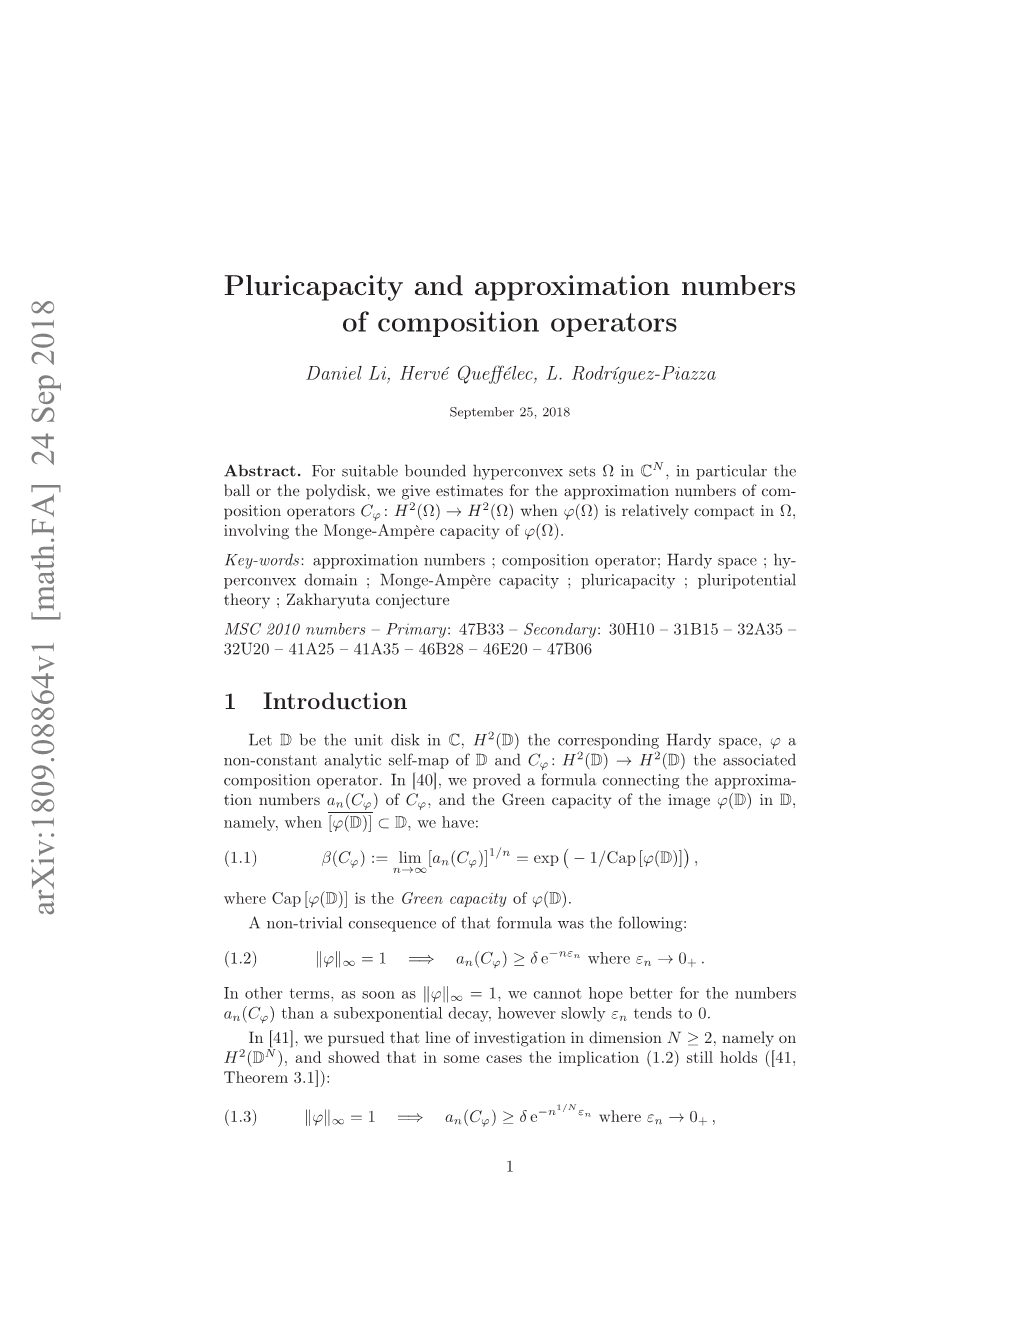 Pluricapacity and Approximation Numbers of Composition Operators